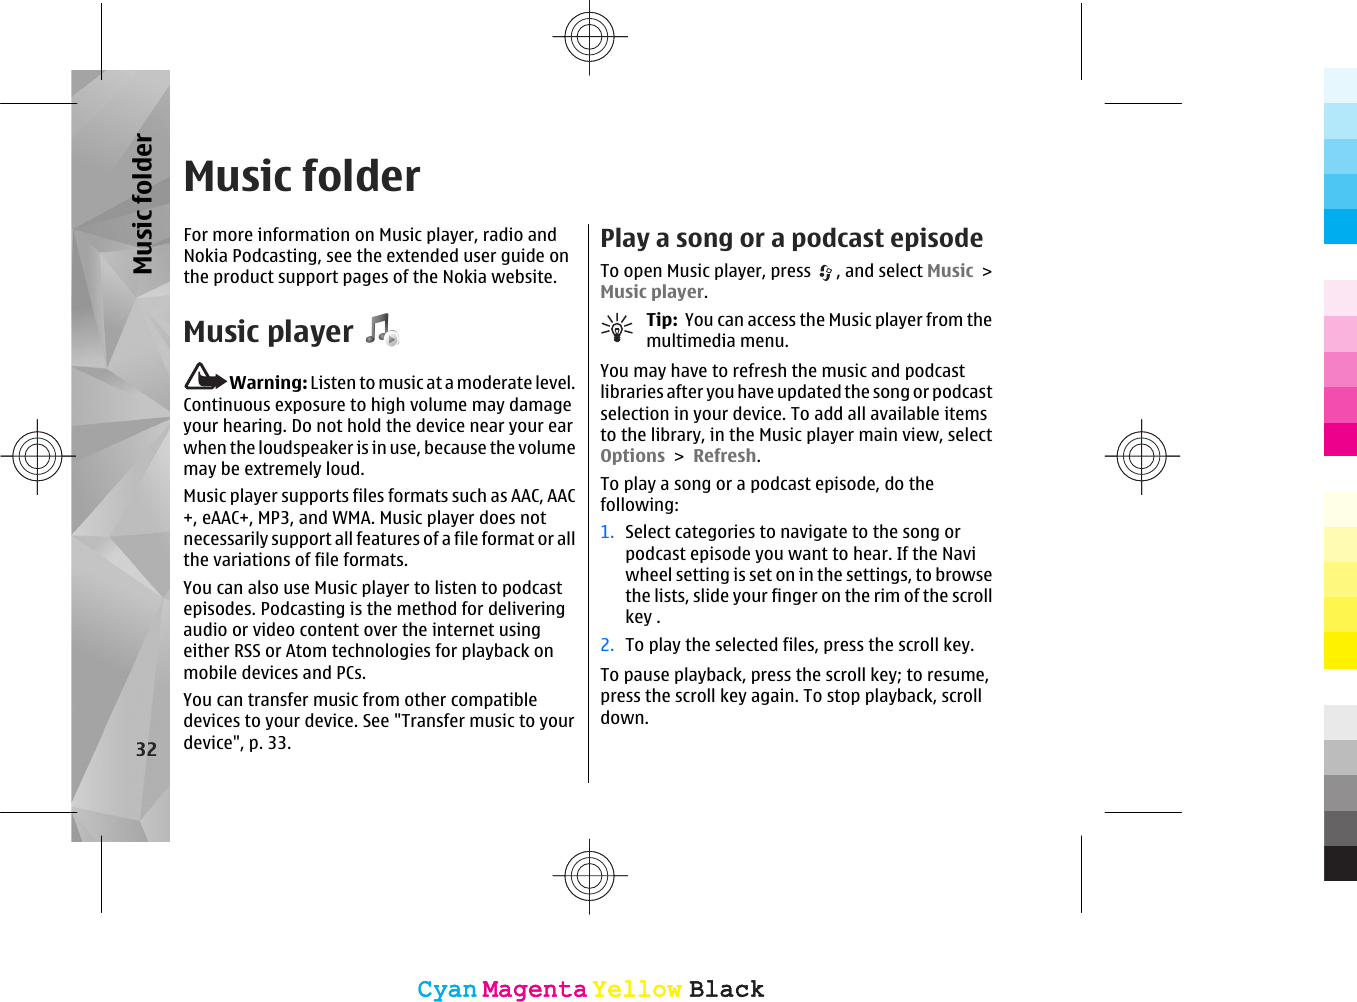 Music folderFor more information on Music player, radio andNokia Podcasting, see the extended user guide onthe product support pages of the Nokia website.Music playerWarning: Listen to music at a moderate level.Continuous exposure to high volume may damageyour hearing. Do not hold the device near your earwhen the loudspeaker is in use, because the volumemay be extremely loud.Music player supports files formats such as AAC, AAC+, eAAC+, MP3, and WMA. Music player does notnecessarily support all features of a file format or allthe variations of file formats.You can also use Music player to listen to podcastepisodes. Podcasting is the method for deliveringaudio or video content over the internet usingeither RSS or Atom technologies for playback onmobile devices and PCs.You can transfer music from other compatibledevices to your device. See &quot;Transfer music to yourdevice&quot;, p. 33.Play a song or a podcast episodeTo open Music player, press  , and select Music &gt;Music player.Tip:  You can access the Music player from themultimedia menu.You may have to refresh the music and podcastlibraries after you have updated the song or podcastselection in your device. To add all available itemsto the library, in the Music player main view, selectOptions &gt; Refresh.To play a song or a podcast episode, do thefollowing:1. Select categories to navigate to the song orpodcast episode you want to hear. If the Naviwheel setting is set on in the settings, to browsethe lists, slide your finger on the rim of the scrollkey .2. To play the selected files, press the scroll key.To pause playback, press the scroll key; to resume,press the scroll key again. To stop playback, scrolldown.32Music folderCyanCyanMagentaMagentaYellowYellowBlackBlackCyanCyanMagentaMagentaYellowYellowBlackBlack